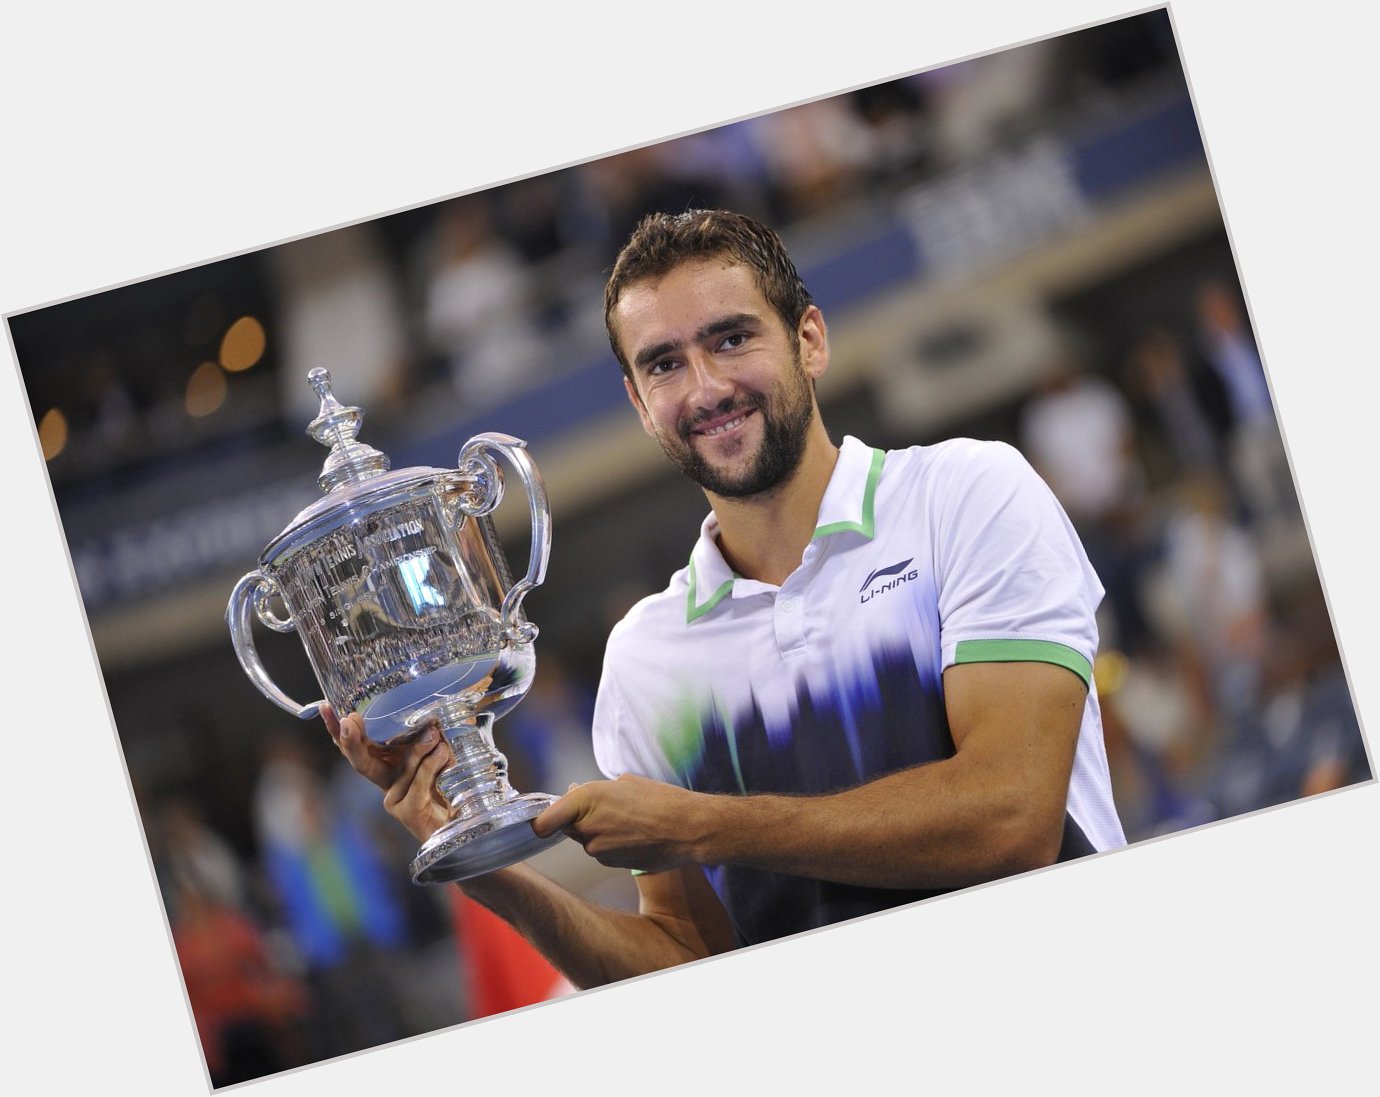 4 2 4 Career Wins
1 7 Career Singles TItles
1 US Open Title

Happy 2 9 th Birthday to the  World No.5 Marin Cilic! 